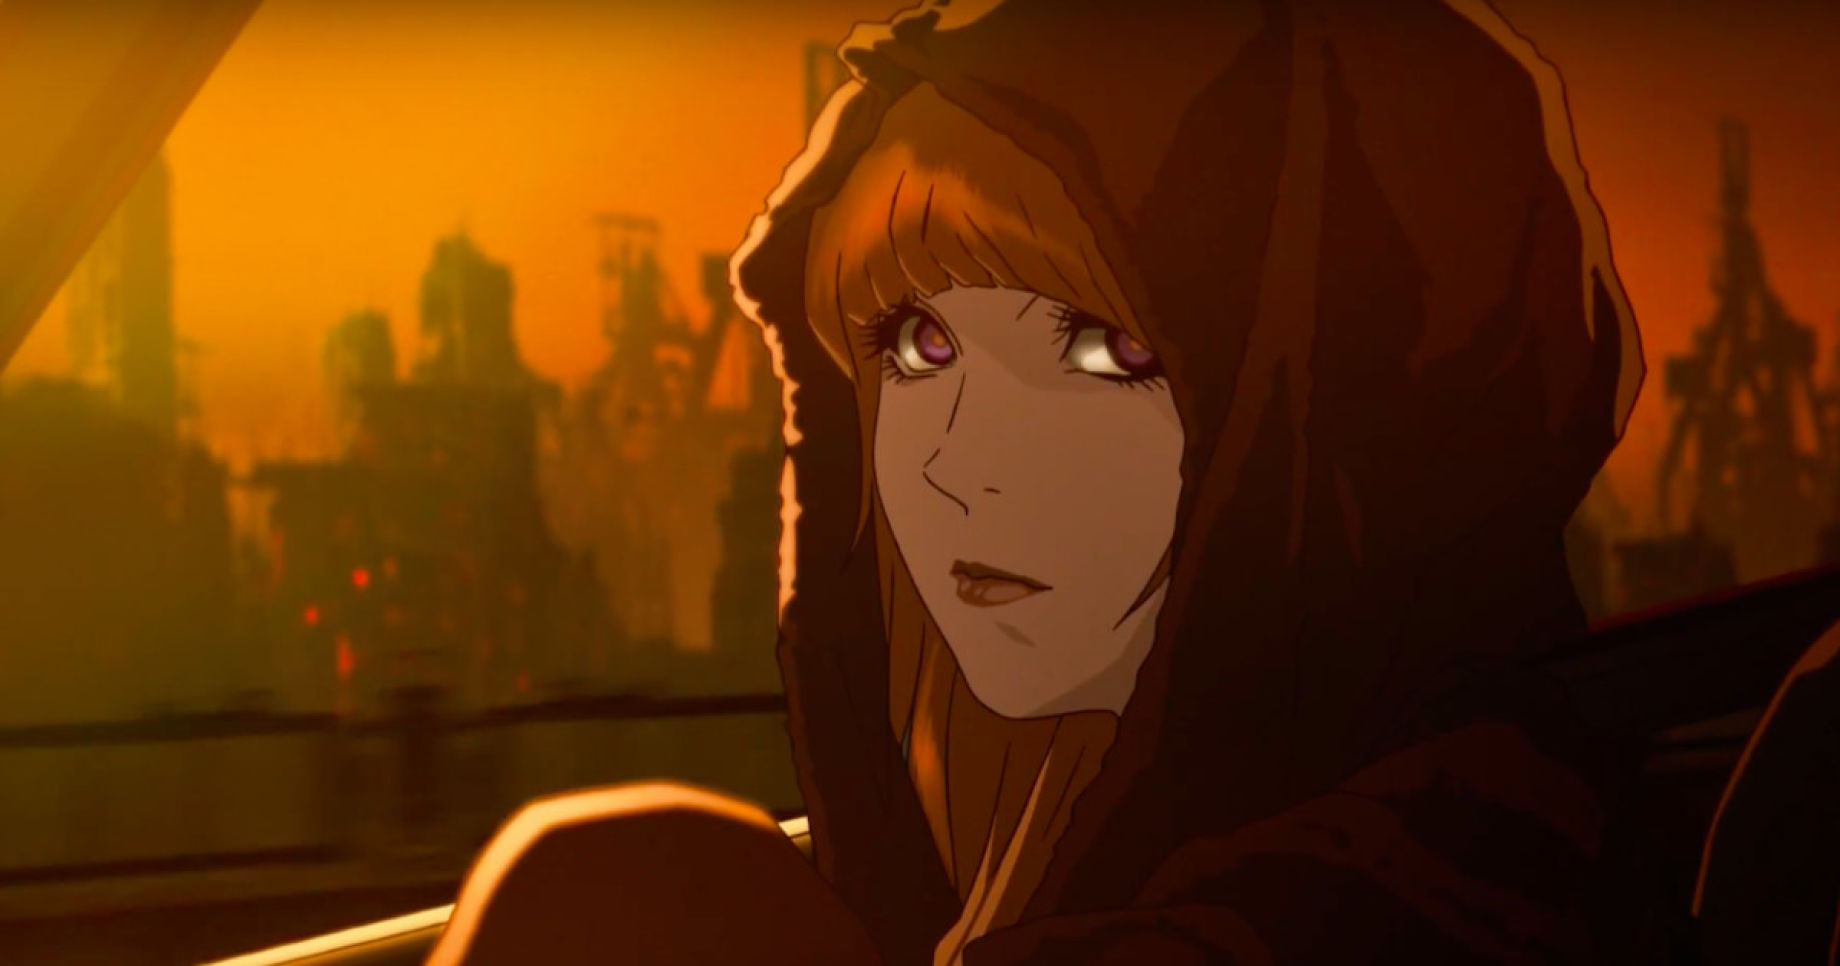 Get Ready for 'Blade Runner 2049' with New Anime Short from Shinichirō  Watanabe | Animation World Network